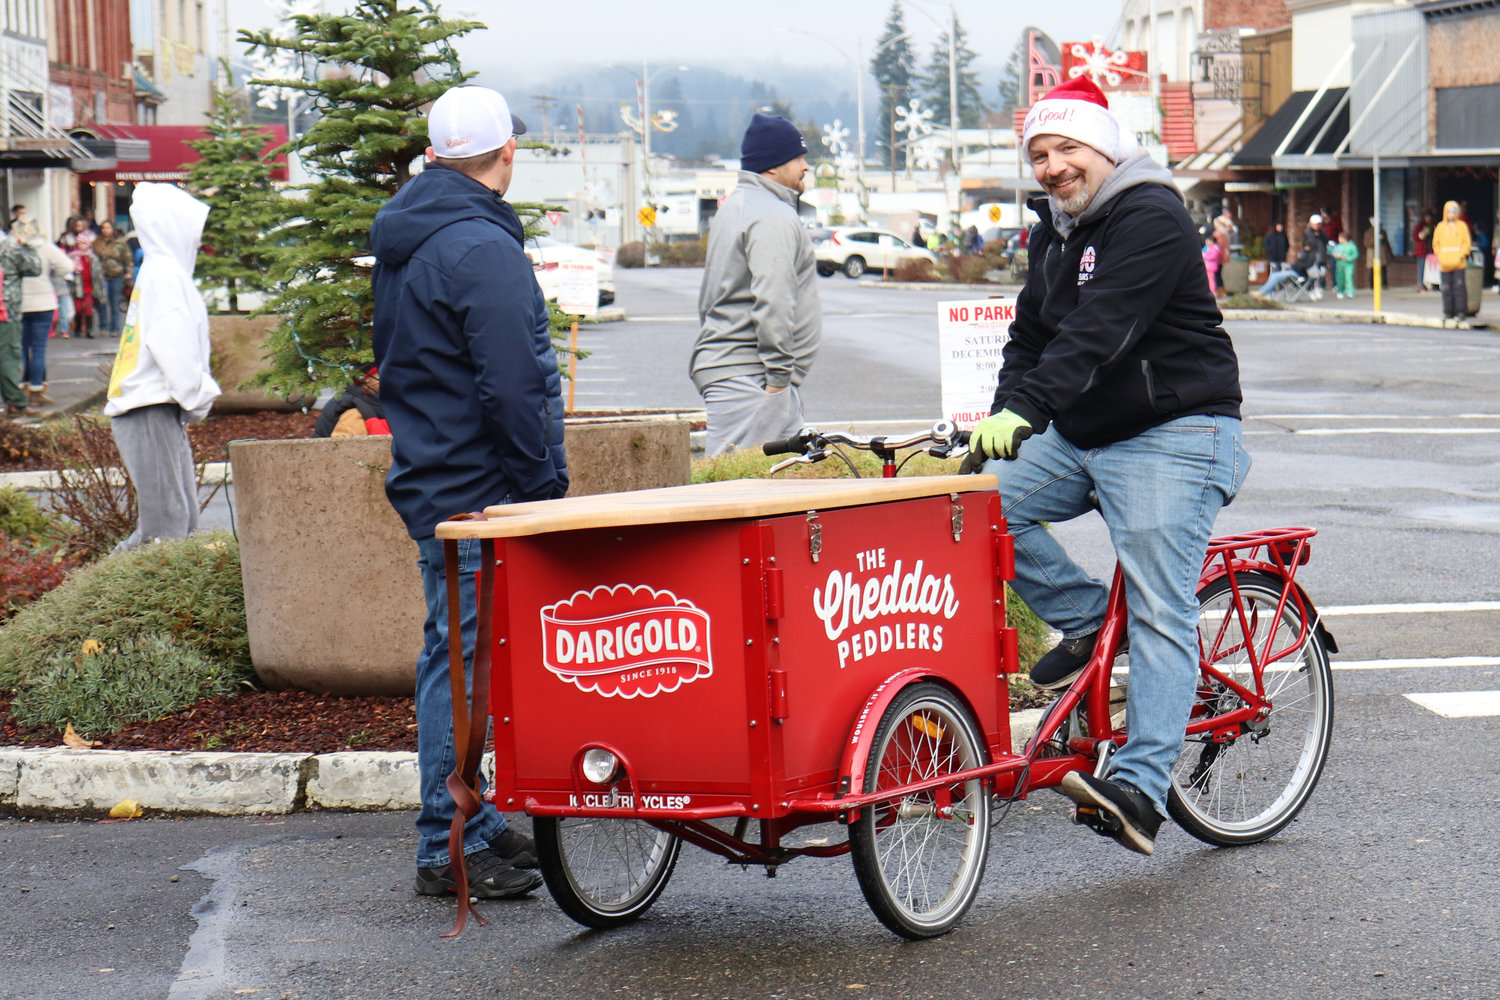 A volunteer delivers free milk, courtesy of Darigold, via the Cheddar Peddler to Santa Parade-viewers in downtown Chehalis on Saturday.